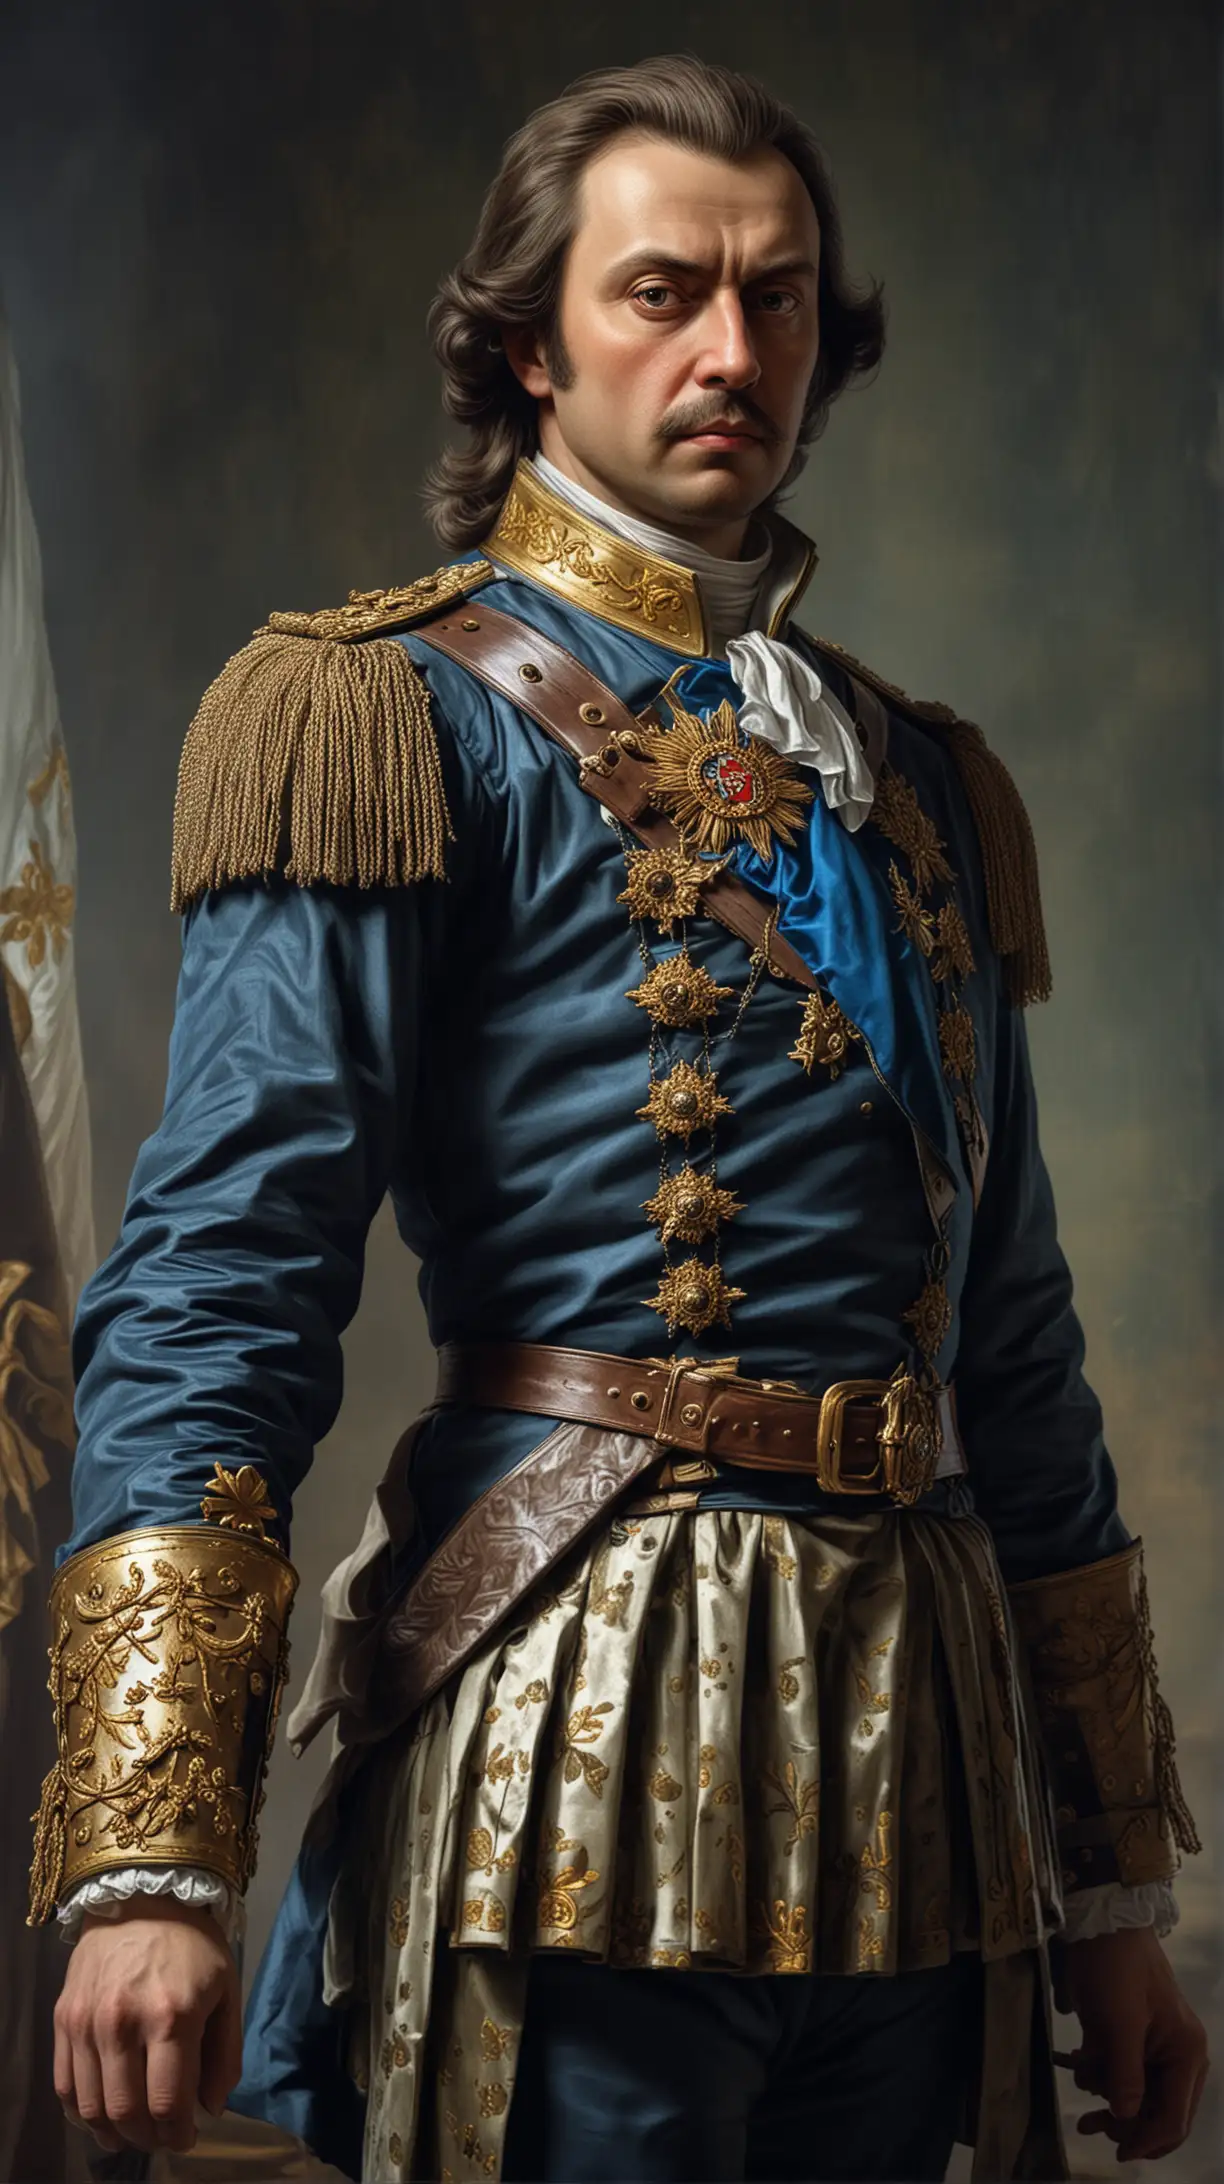 Create an image depicting Peter the Great, the influential Tsar of Russia, standing tall with a determined expression, symbolizing his ambition for modernization.